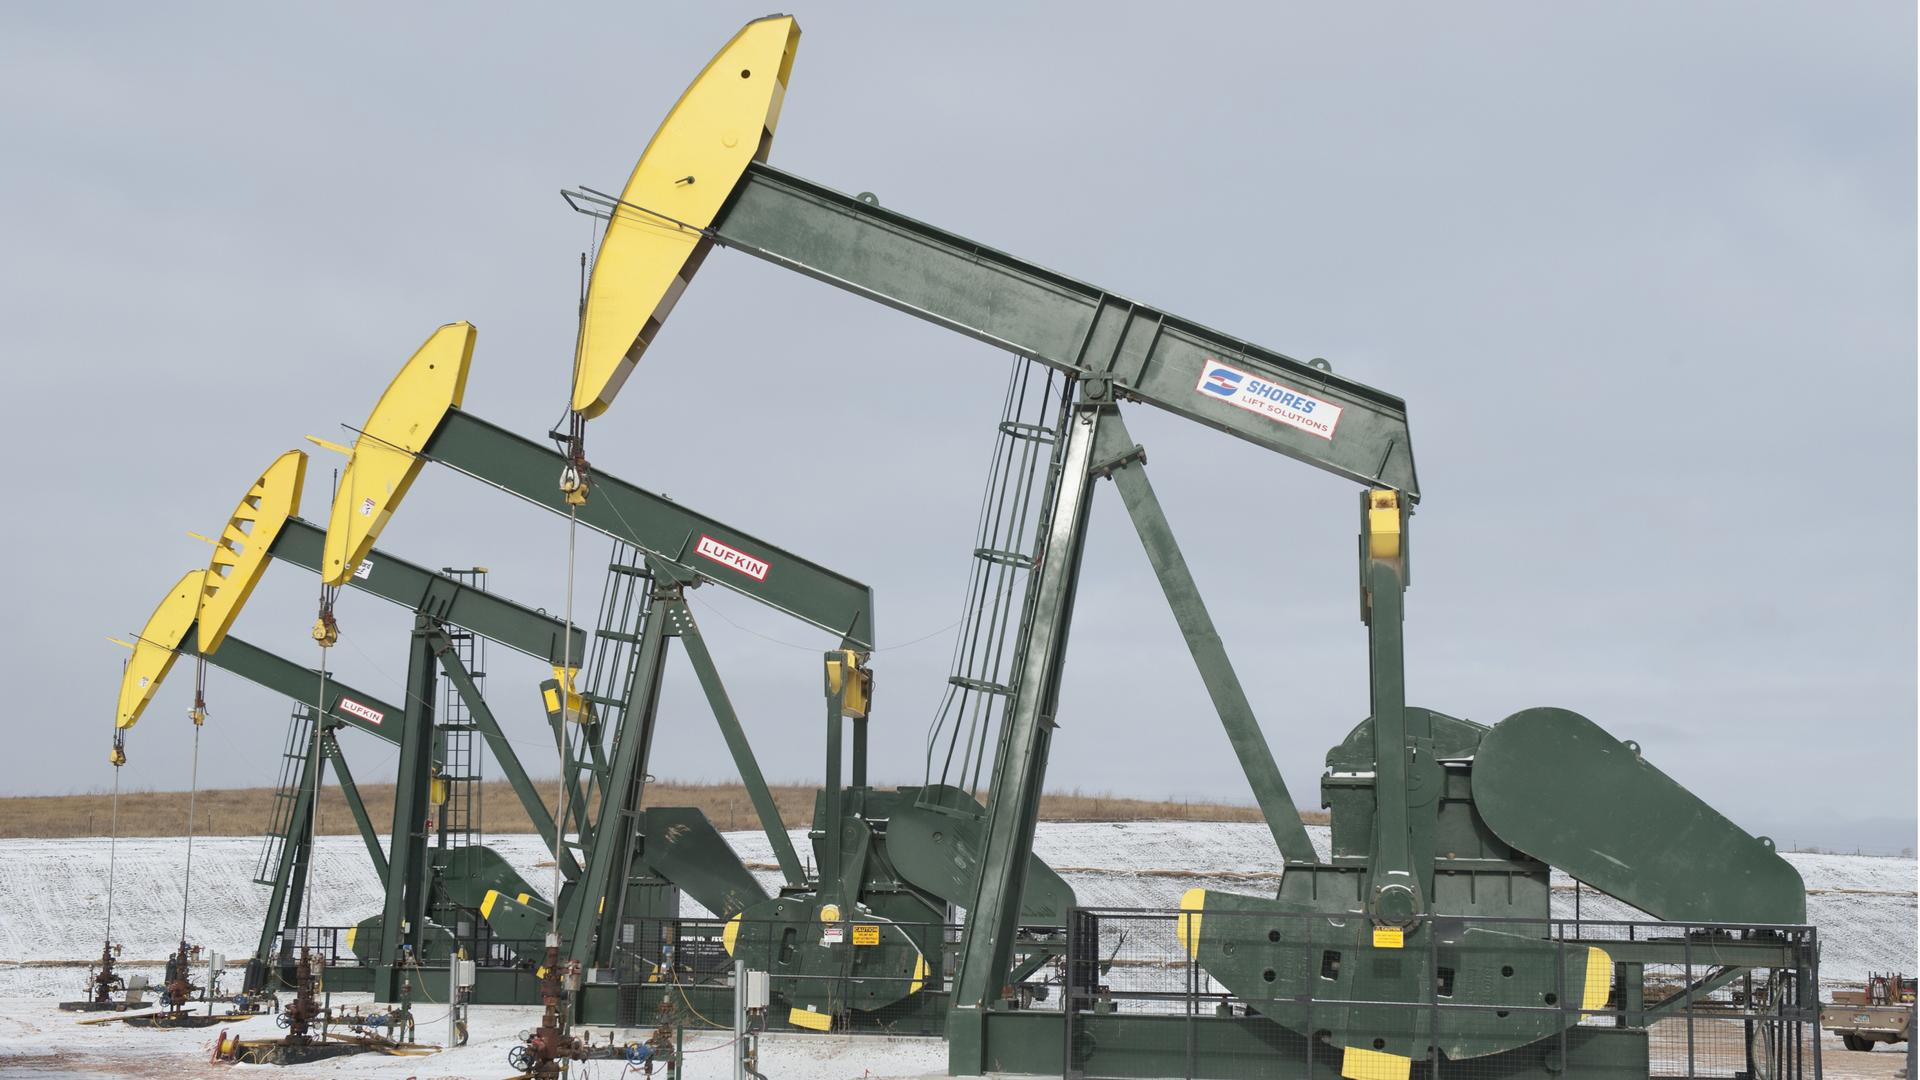 Oil wells near Williston, North Dakota have propelled strong growth in the state. 